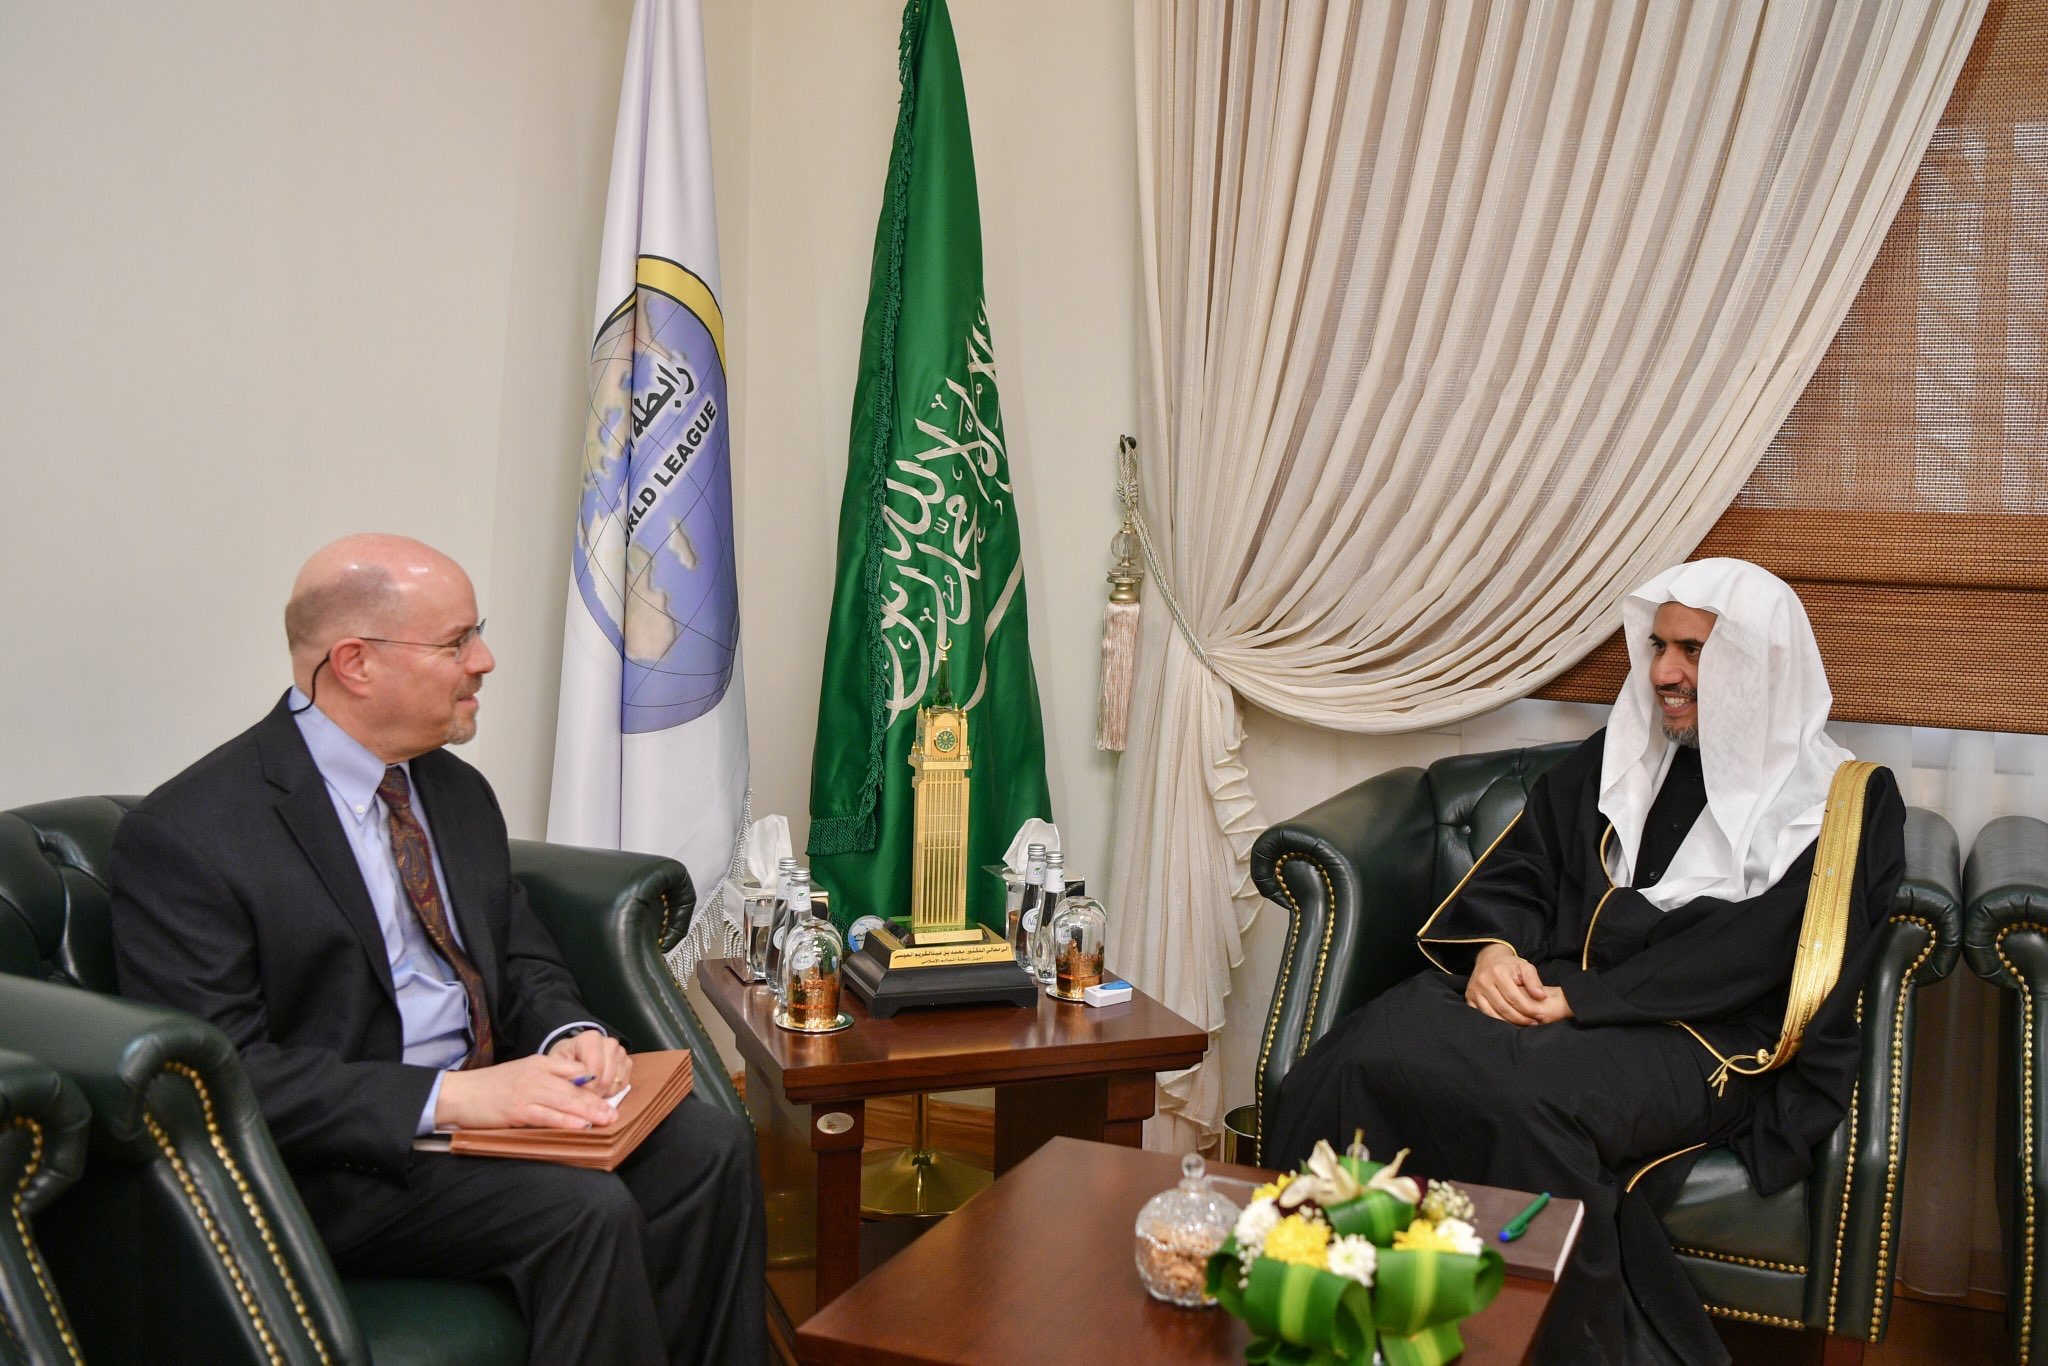 At his Riyadh office, His Excellency the Muslim World League's Secretary General, Dr. Mohammad Alissa, receives the Director of the security & military program at Washington Institute for Near East Policy